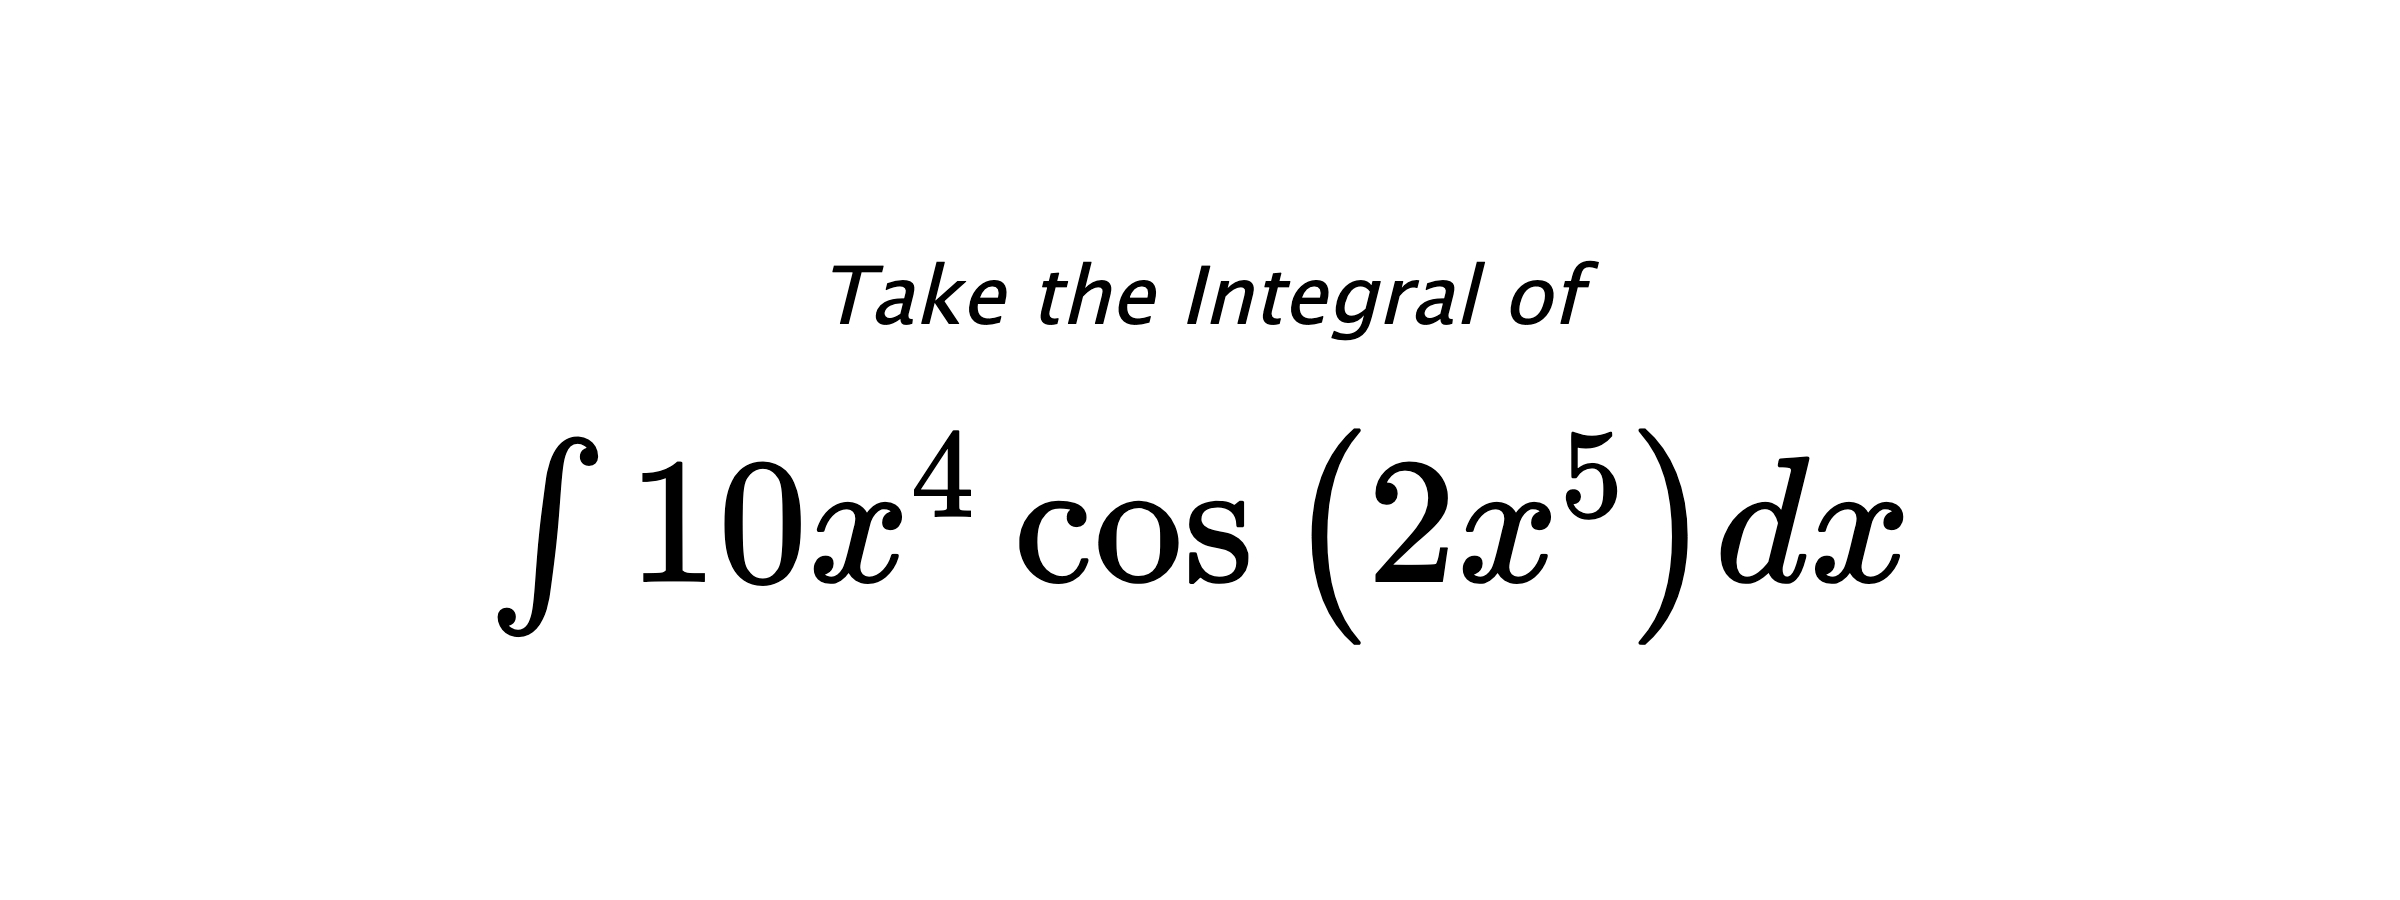 Take the Integral of $ \int 10 x^{4} \cos{\left(2 x^{5} \right)} dx $